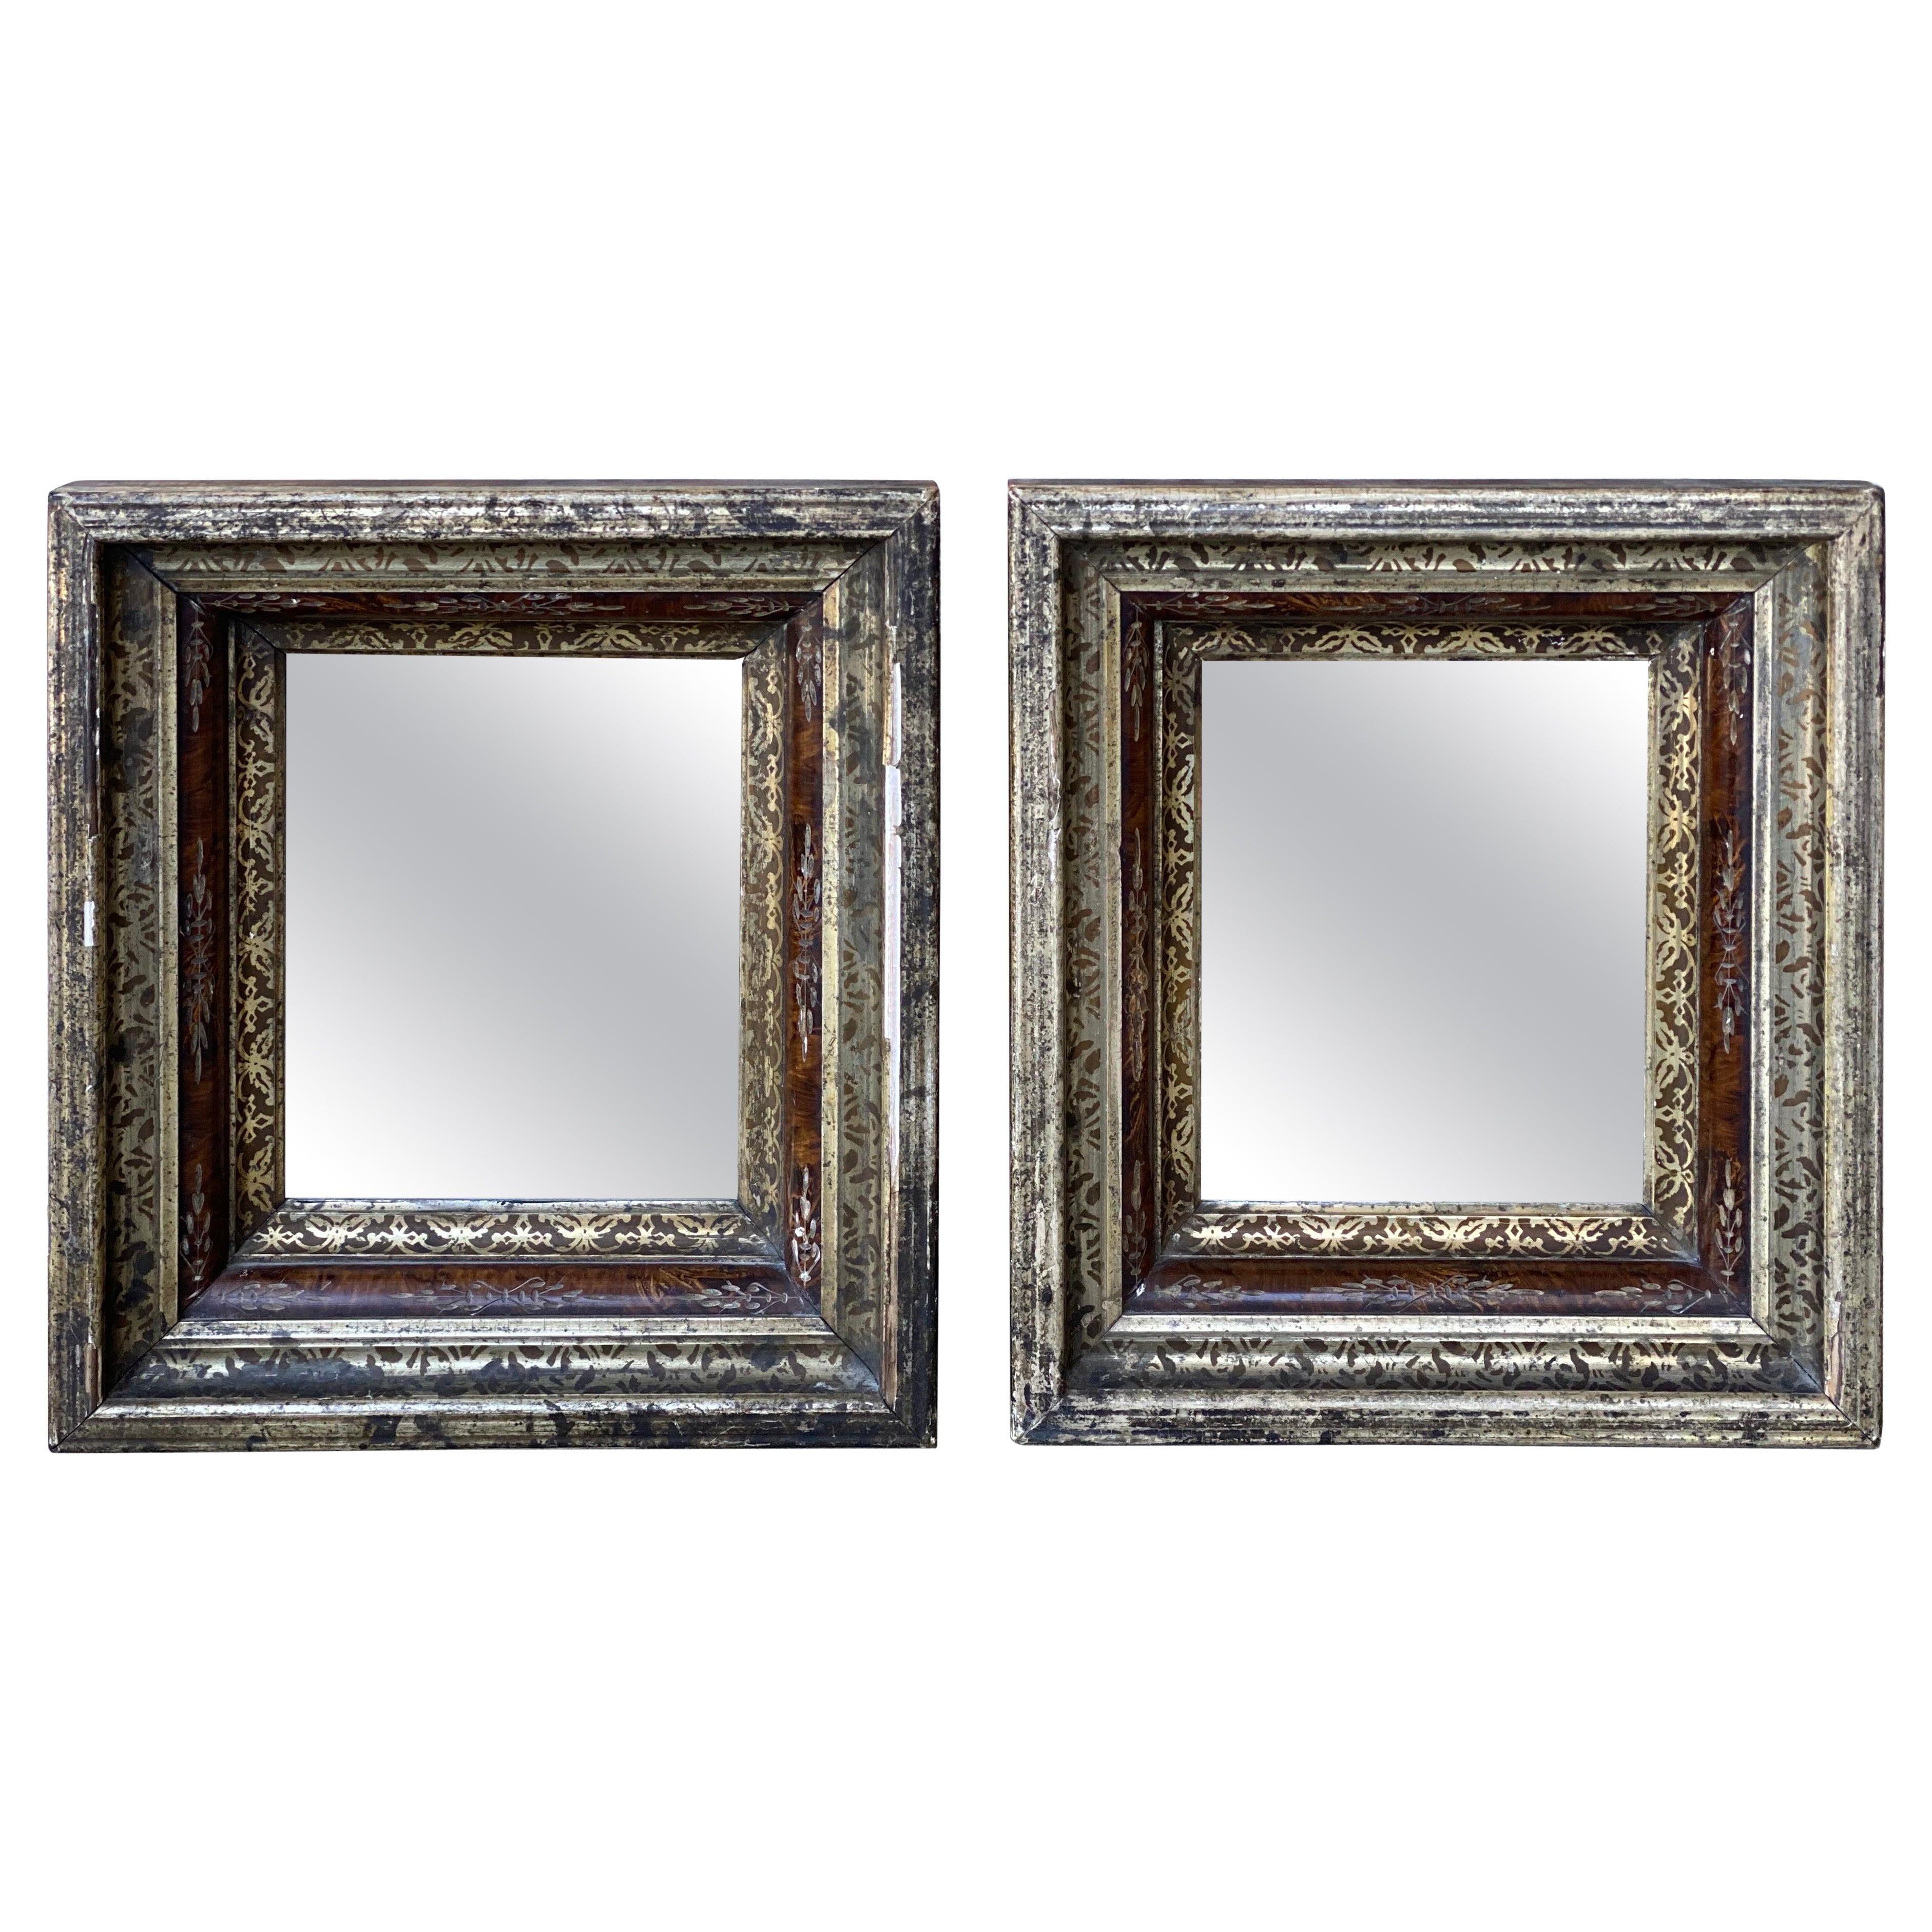 Pair of 19th Century Small Silver-Gilt & Faux Tortoise Shell Patterned Mirrors